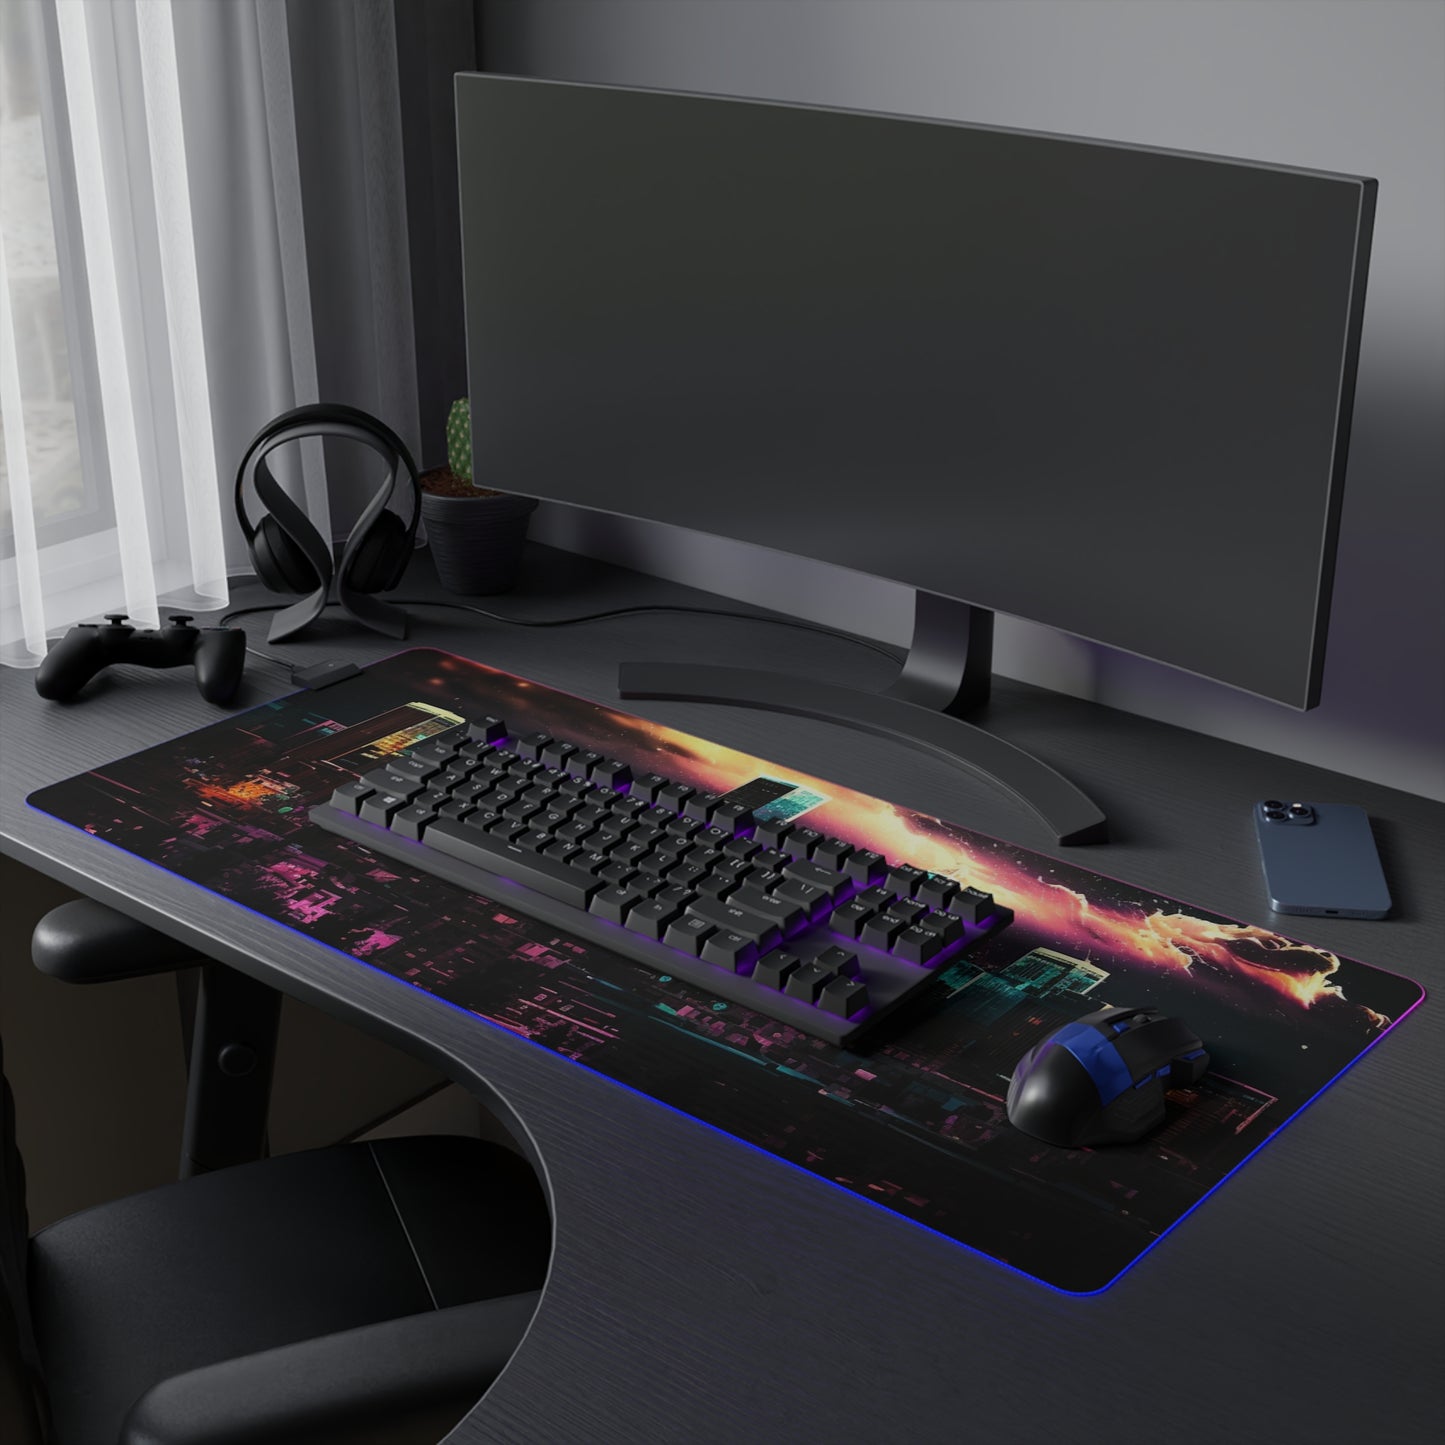 LED Gaming Mouse Pad Neon Denver 1